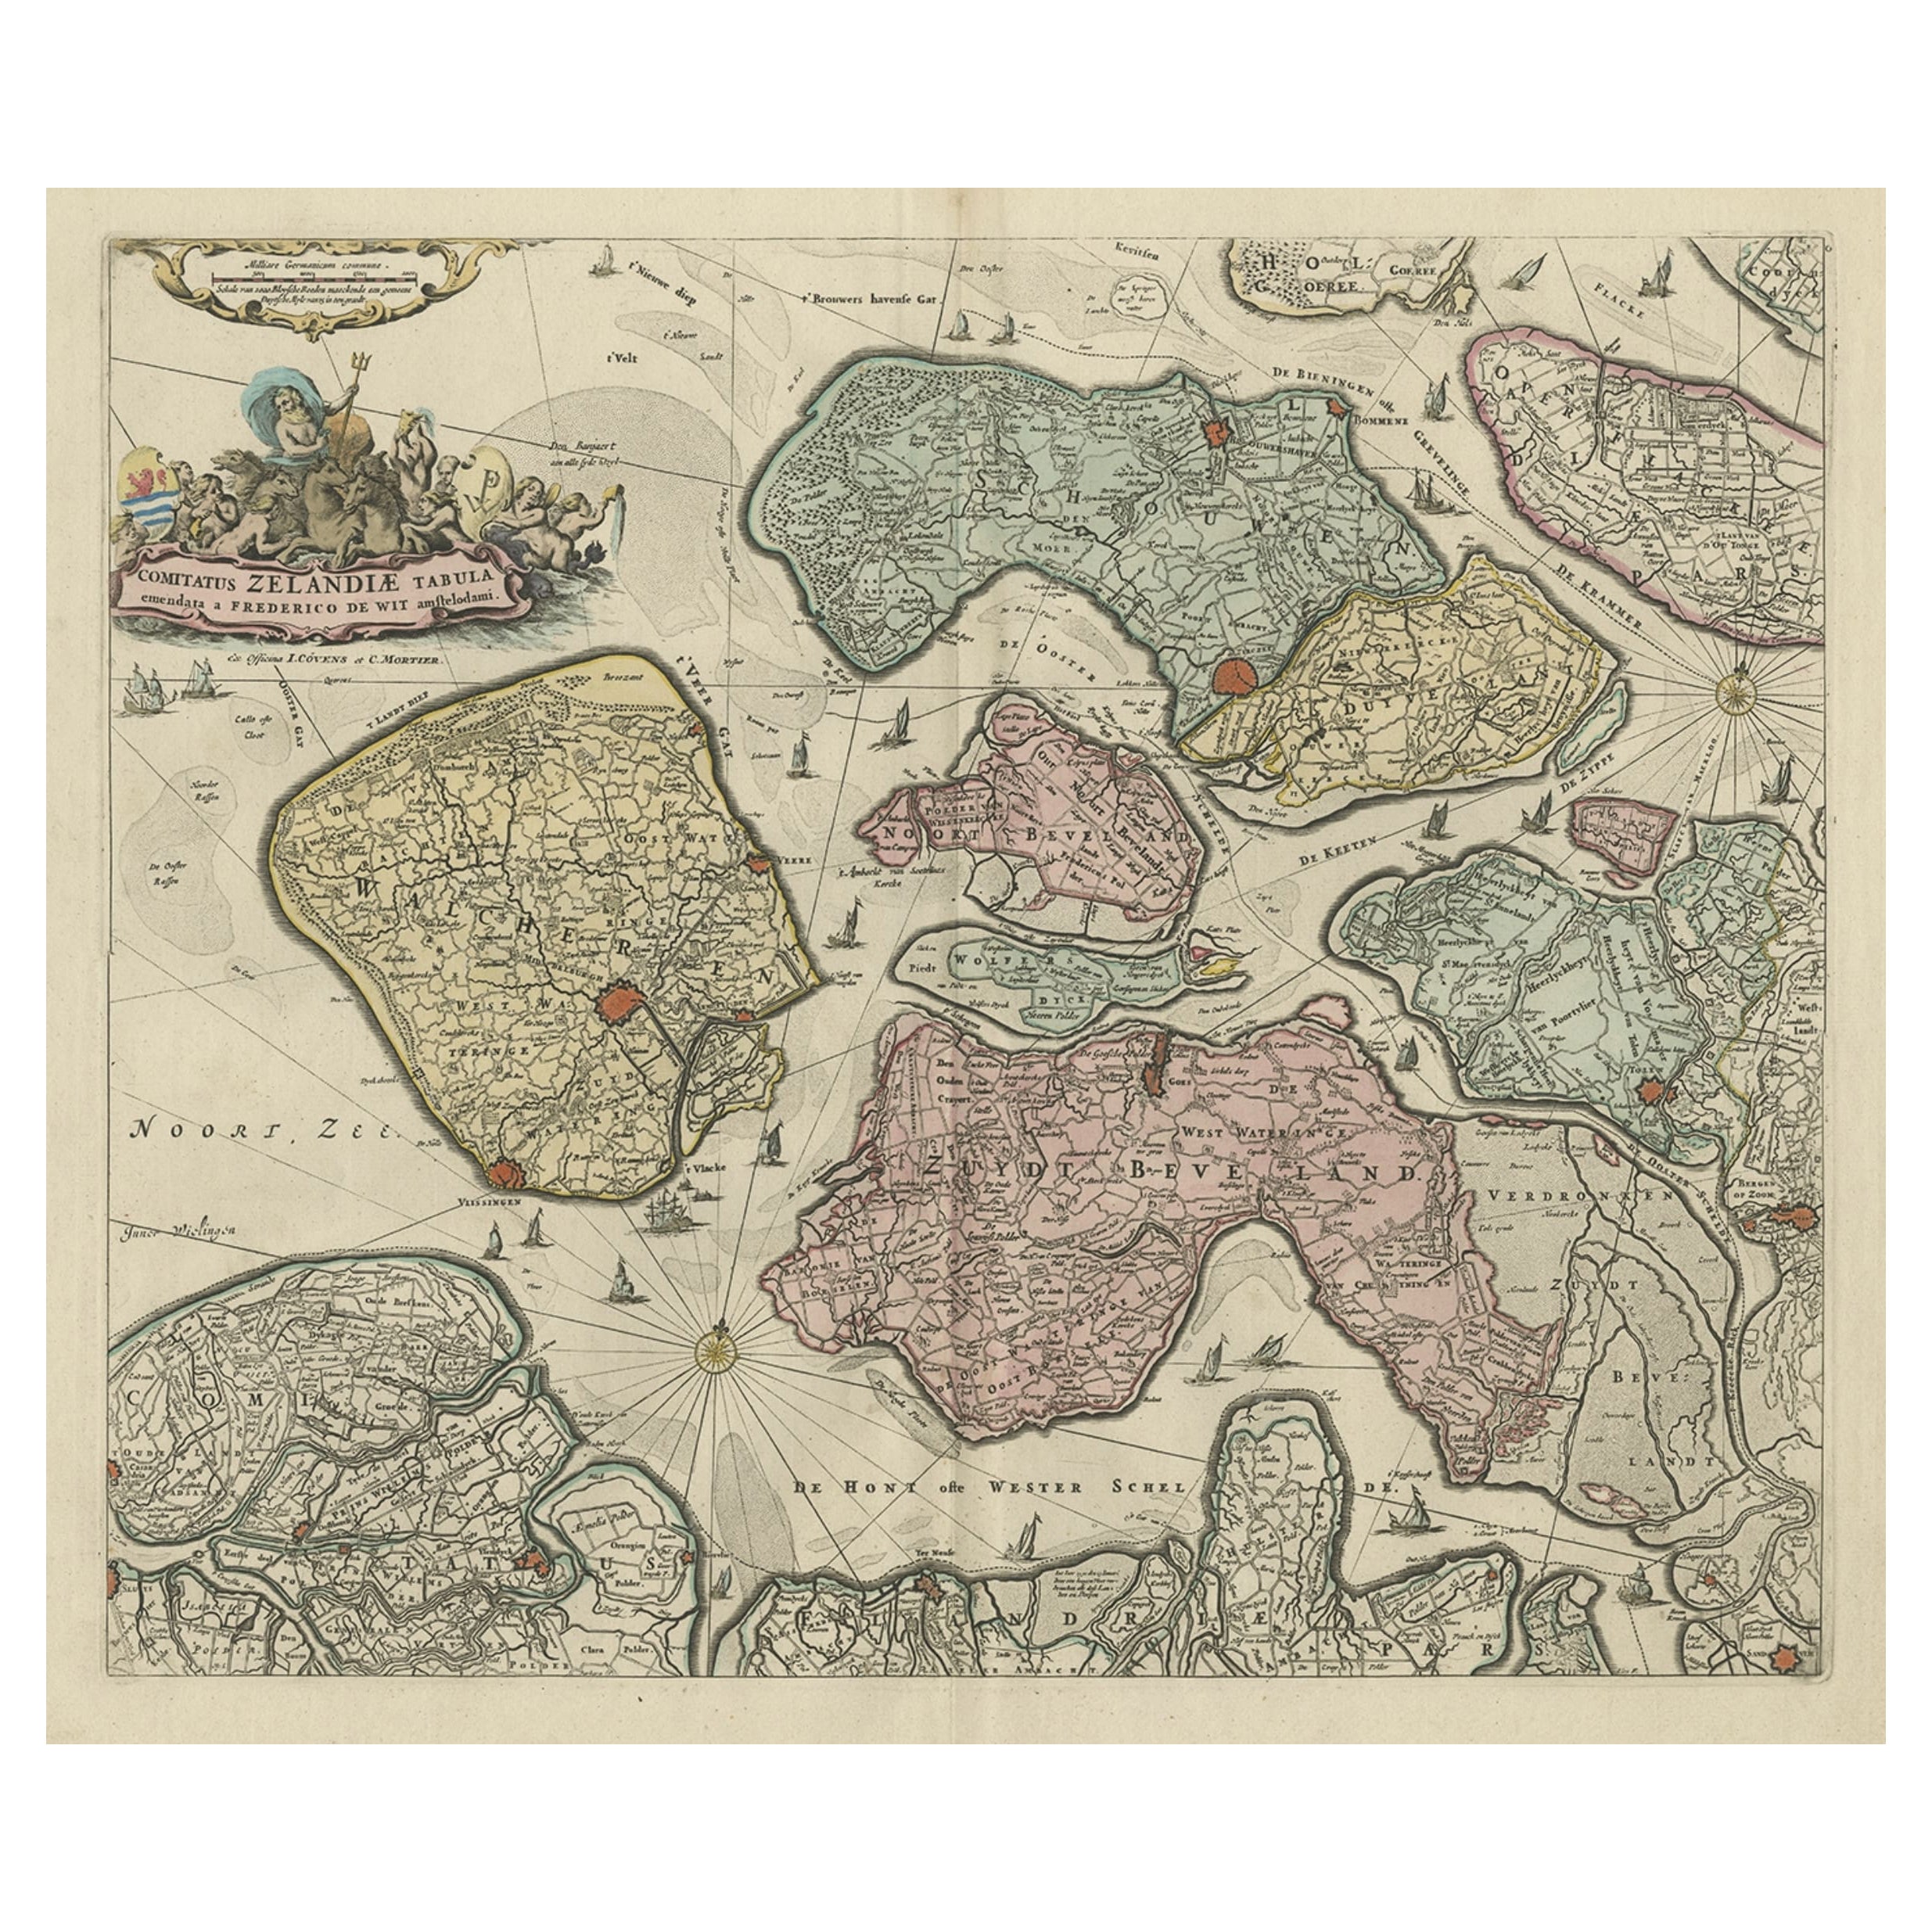 Decorative Antique Sea Chart of Zeeland, a Province of the Netherlands, ca.1730